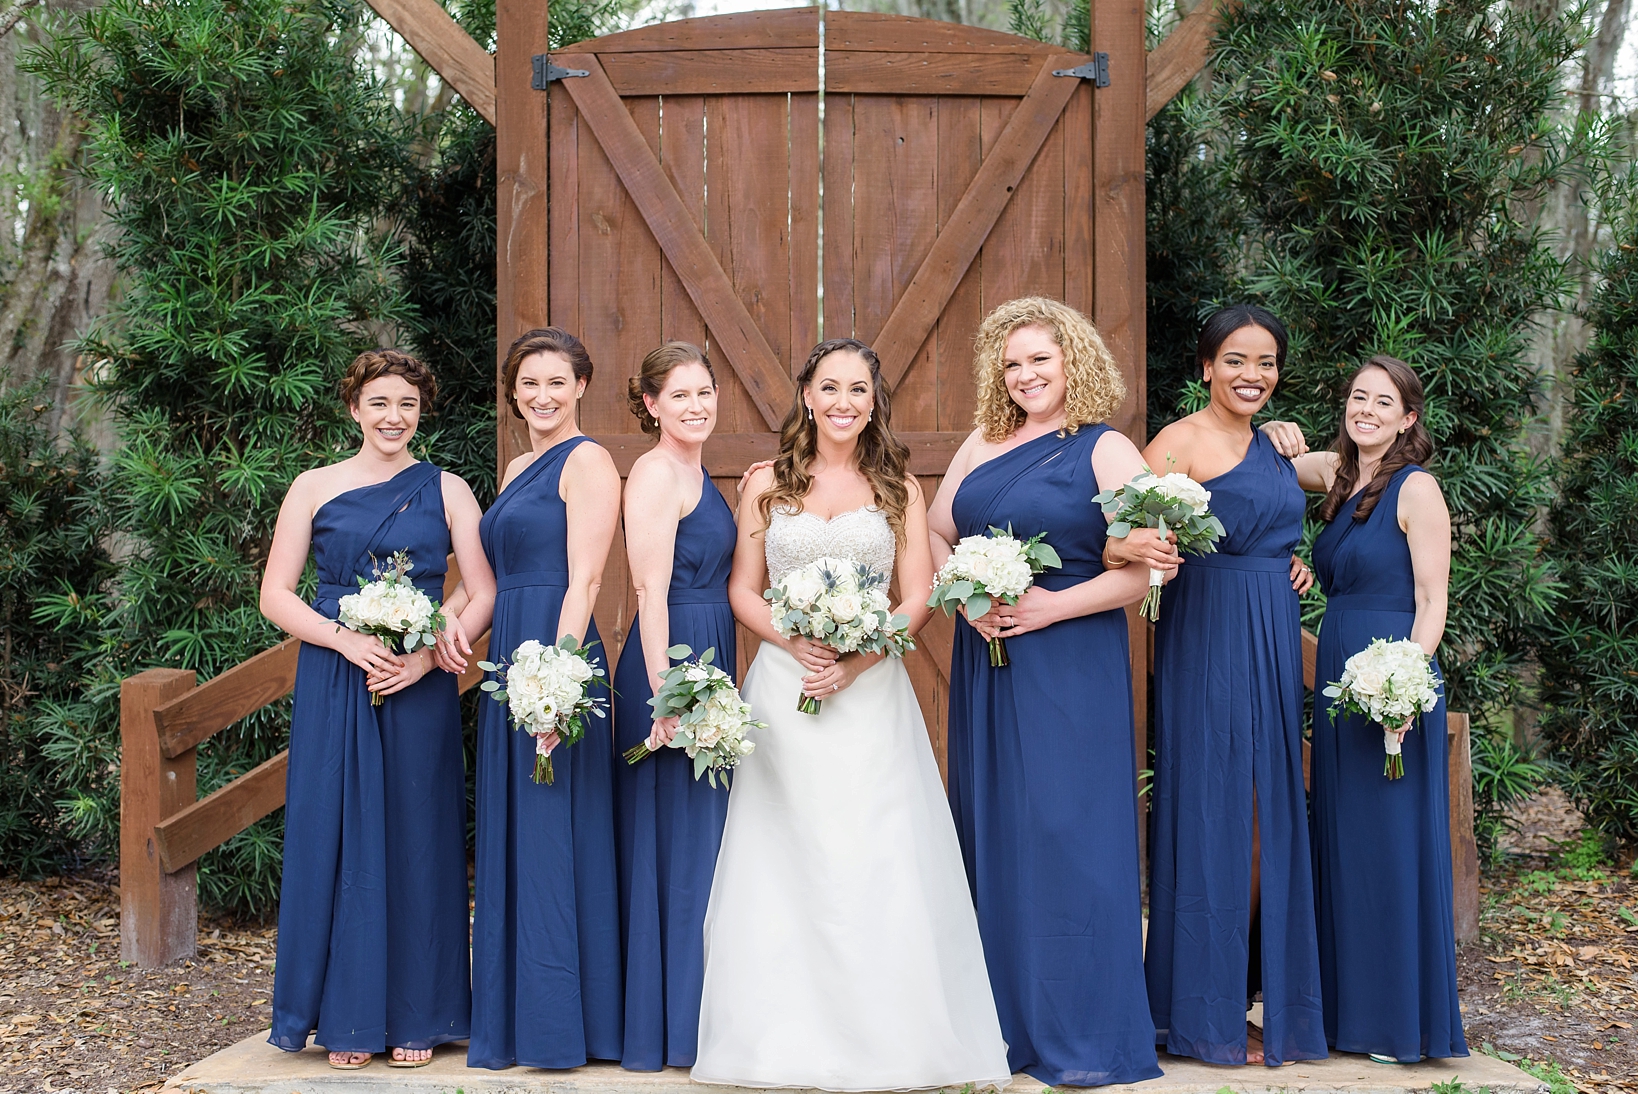 The Bride and her Bridesmaids in front of a large wooden door